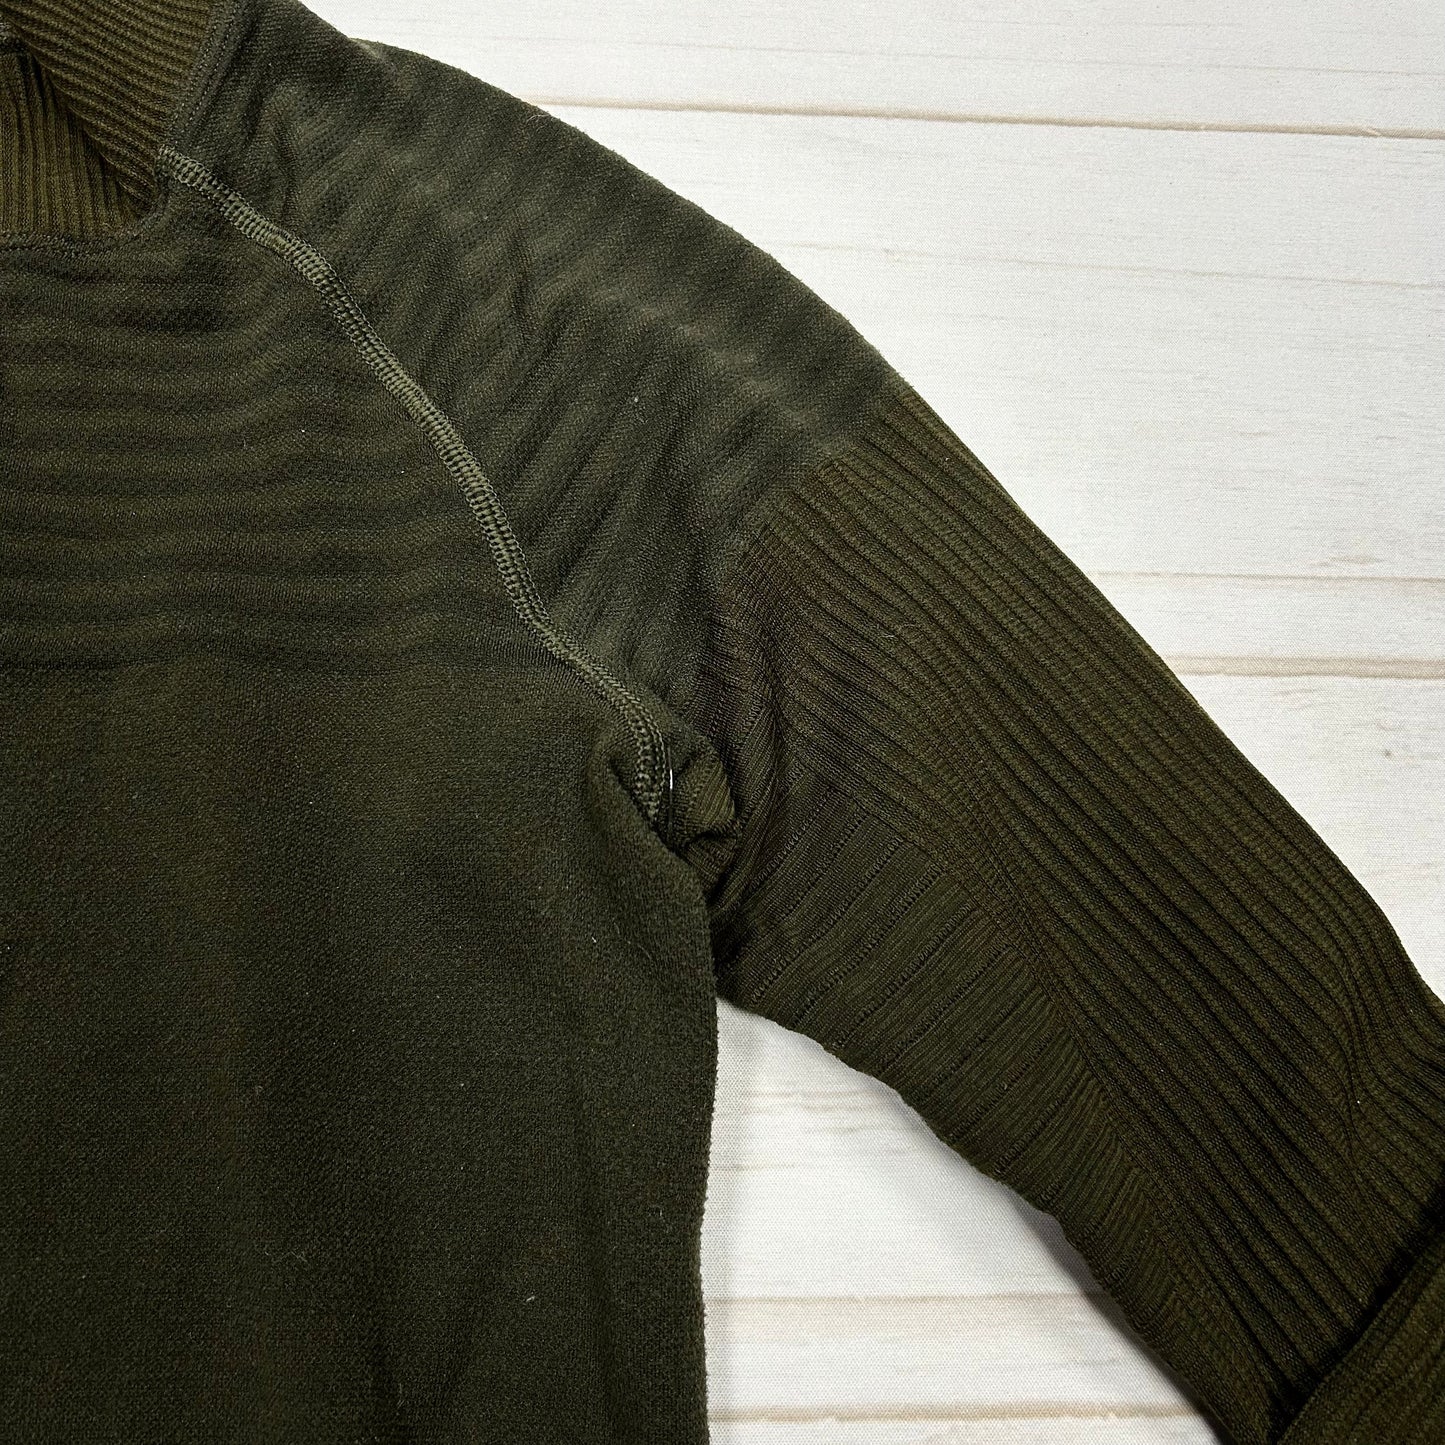 Athletic Top Long Sleeve Collar By Lululemon  Size: S